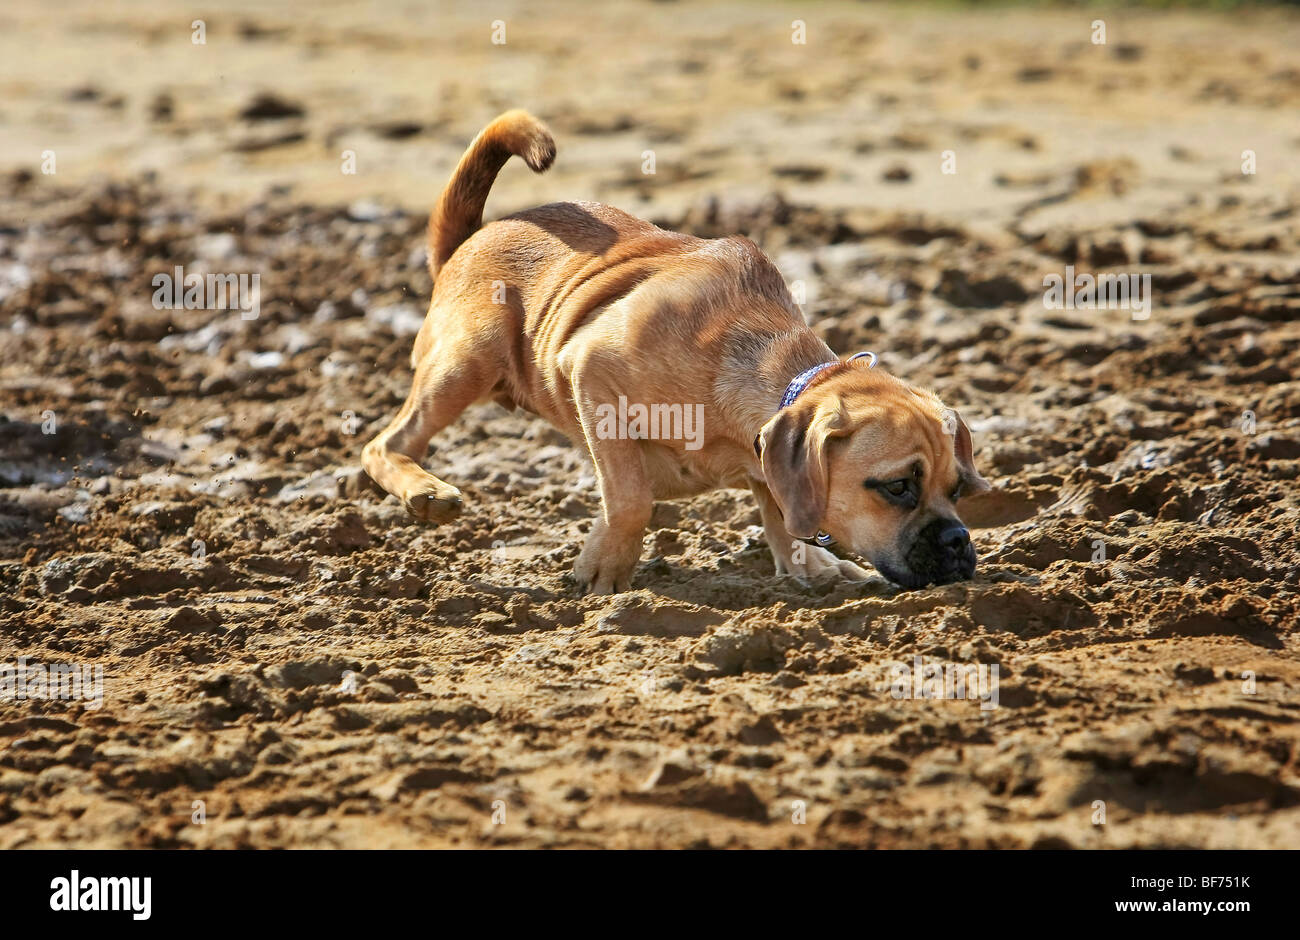 Puggle dog - puppy in sand Stock Photo